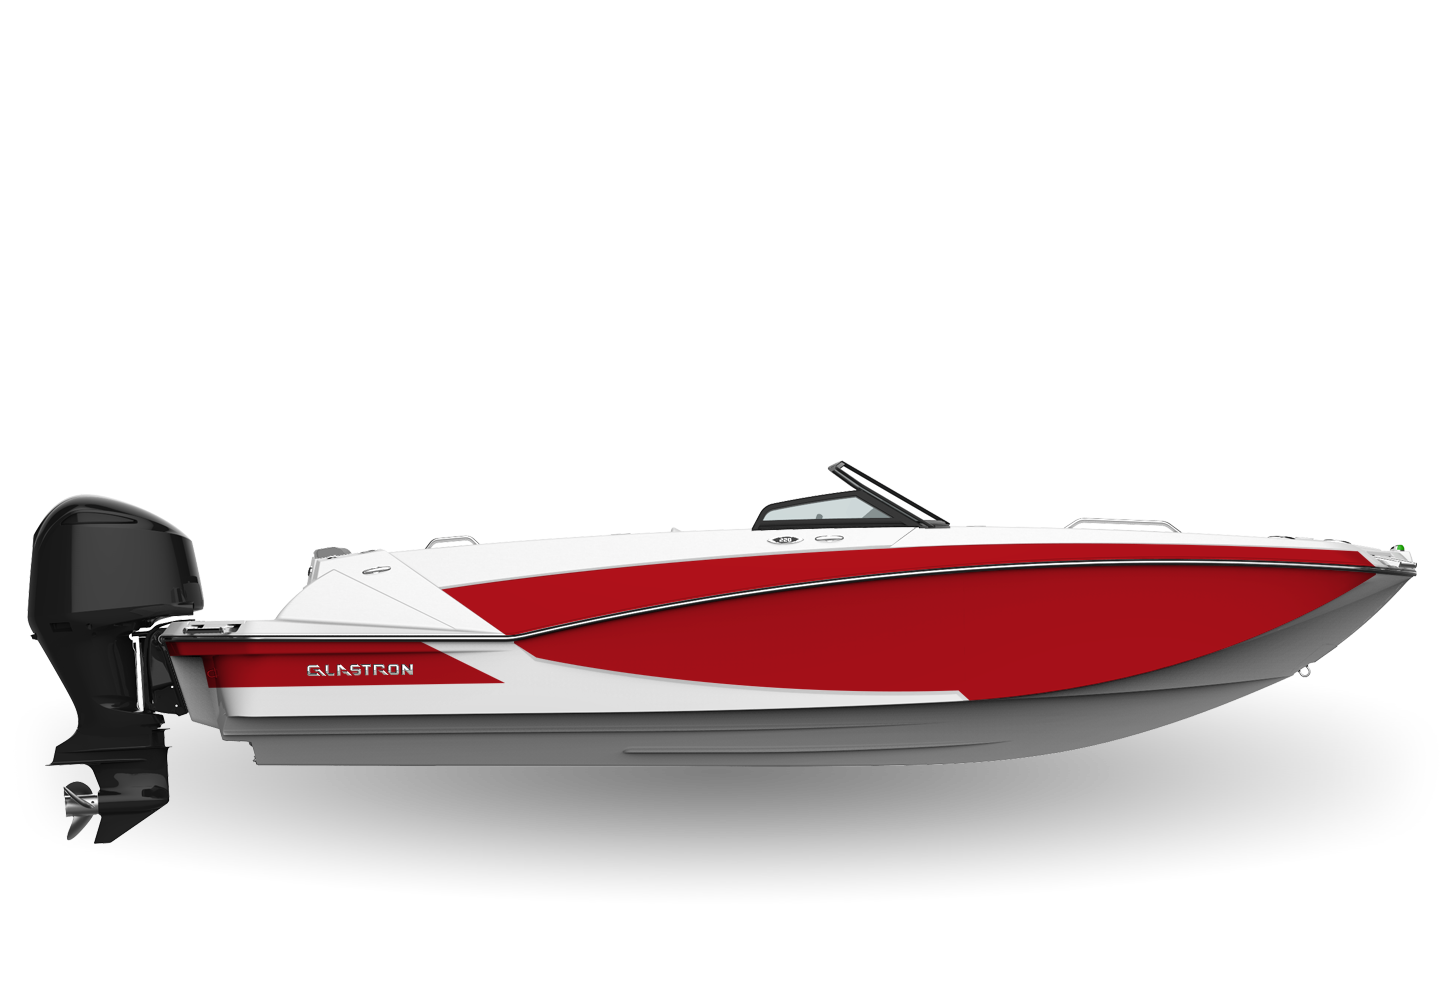 Pick the Engine You Want Your 2019 Glastron® Boat To Have